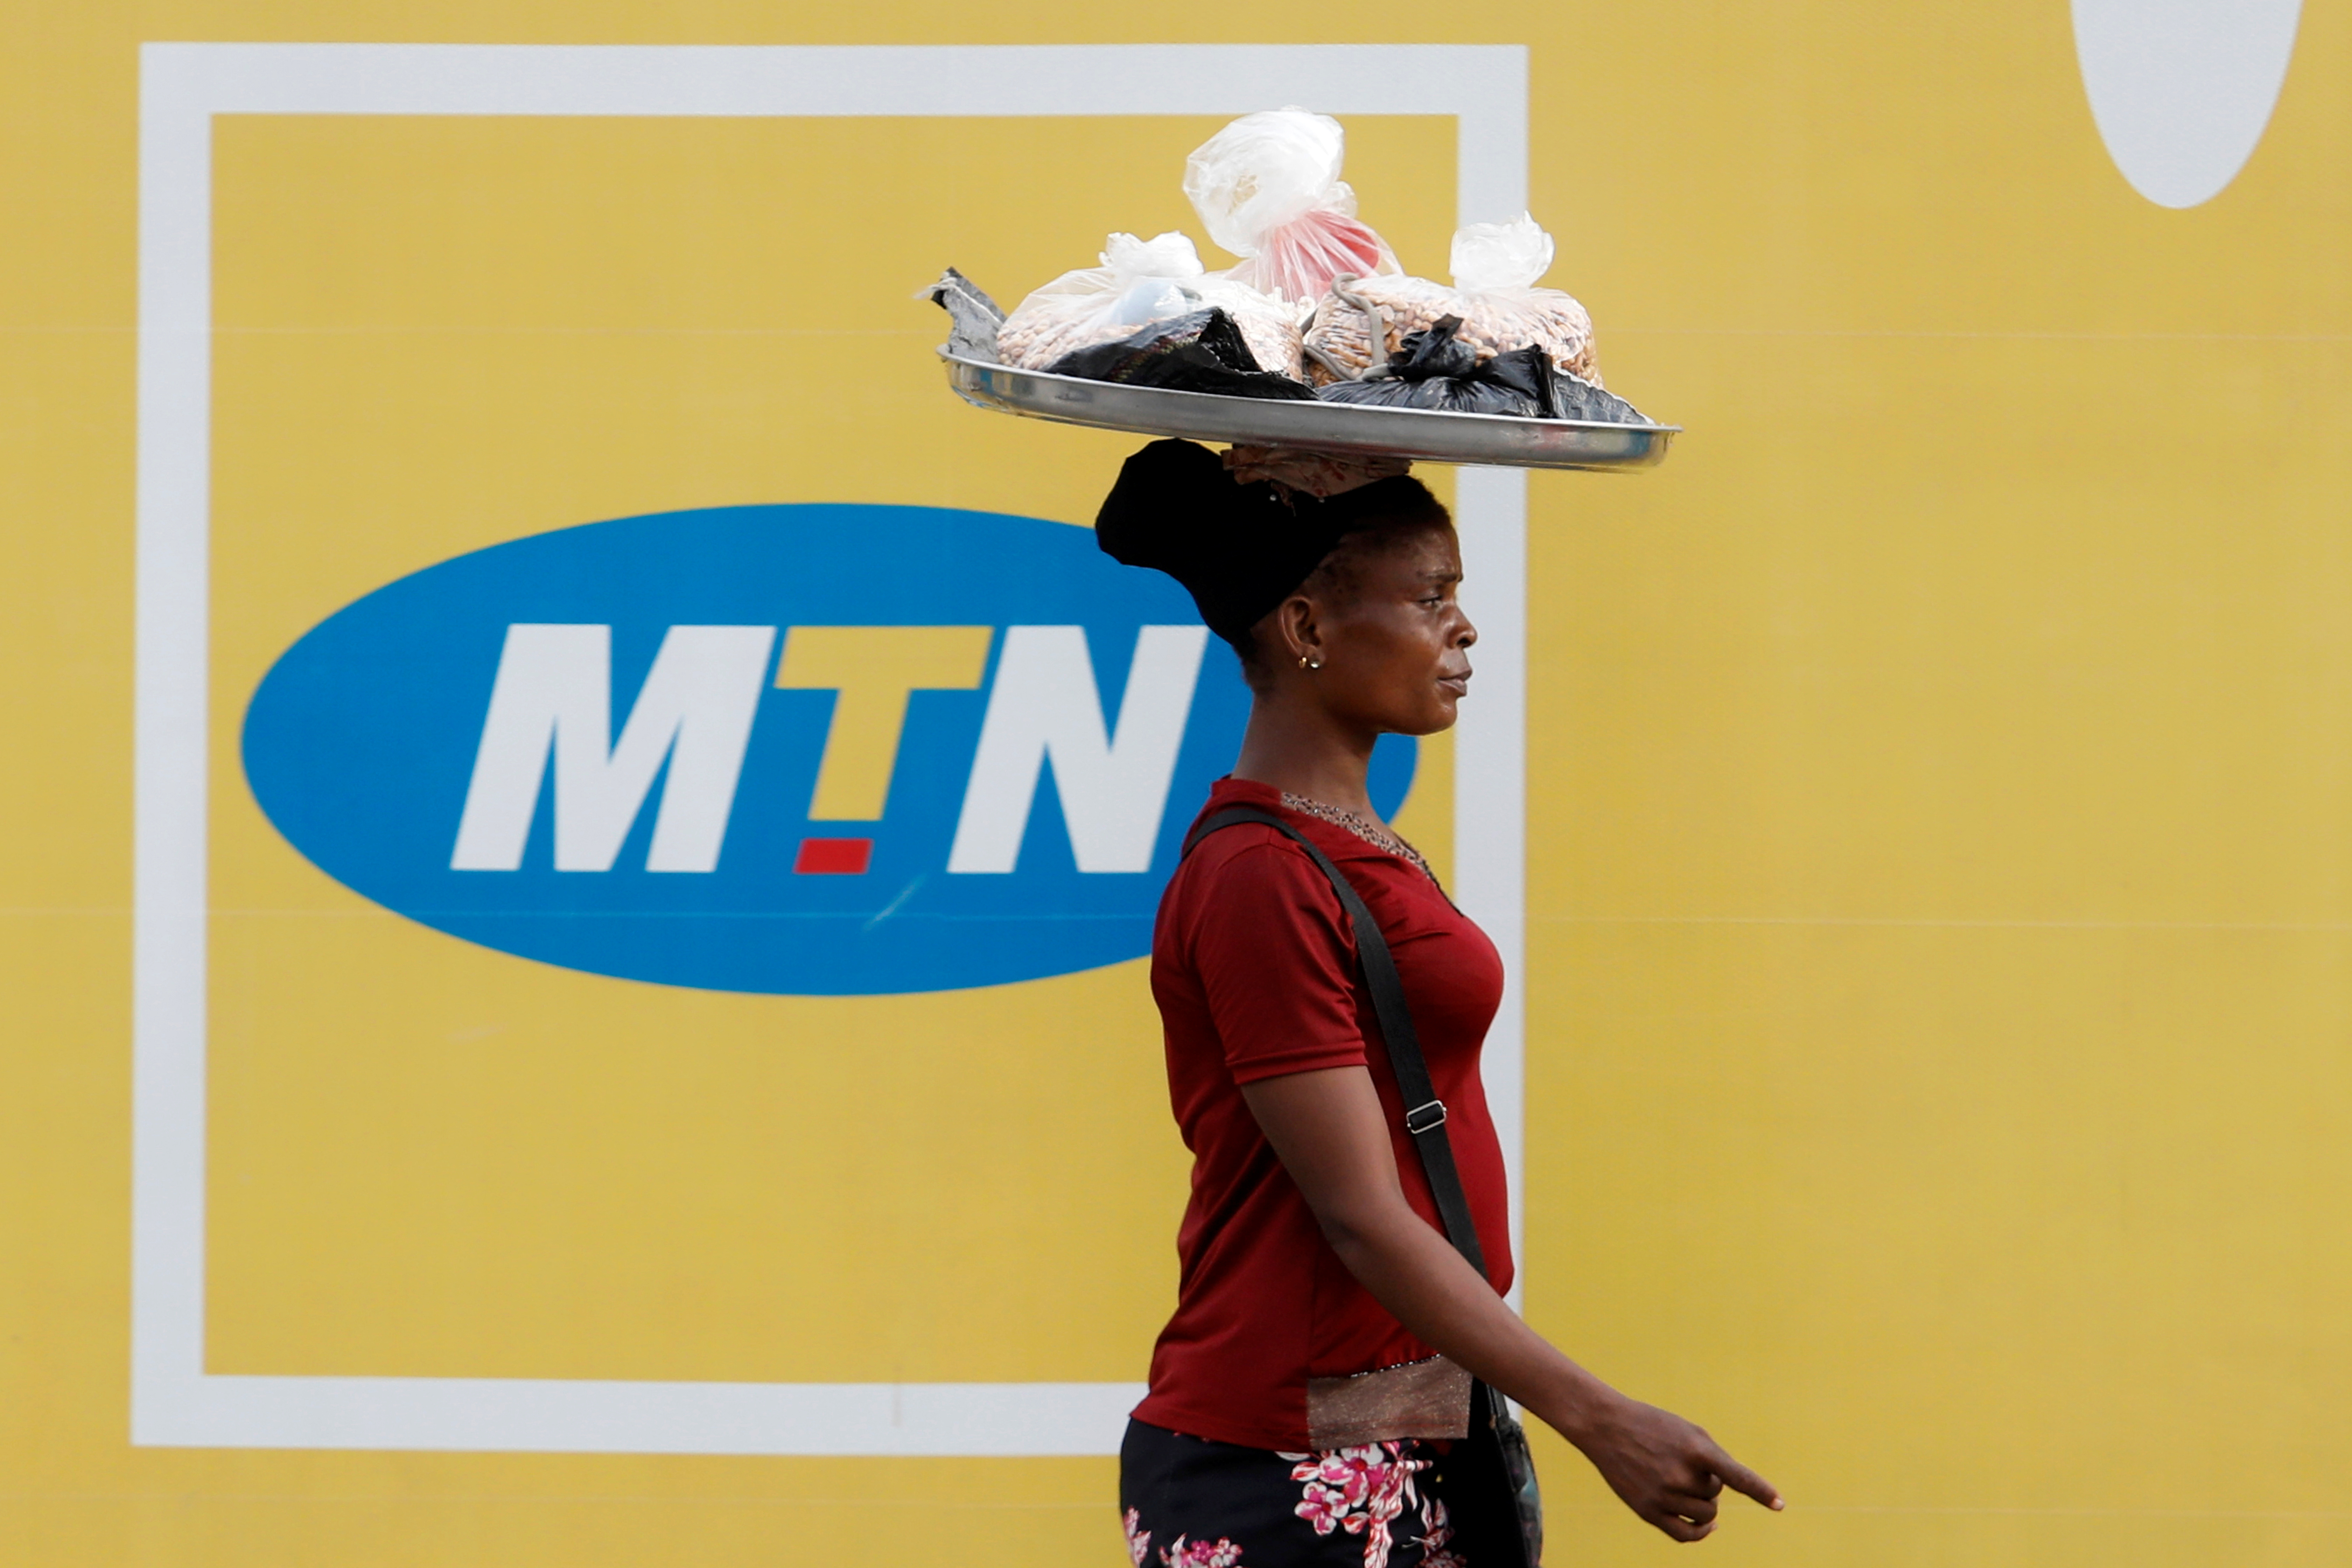 A woman walks past an advertising posters for MTN telecommunication company along a street in Lagos, Nigeria August 28, 2019.  REUTERS/Temilade Adelaja